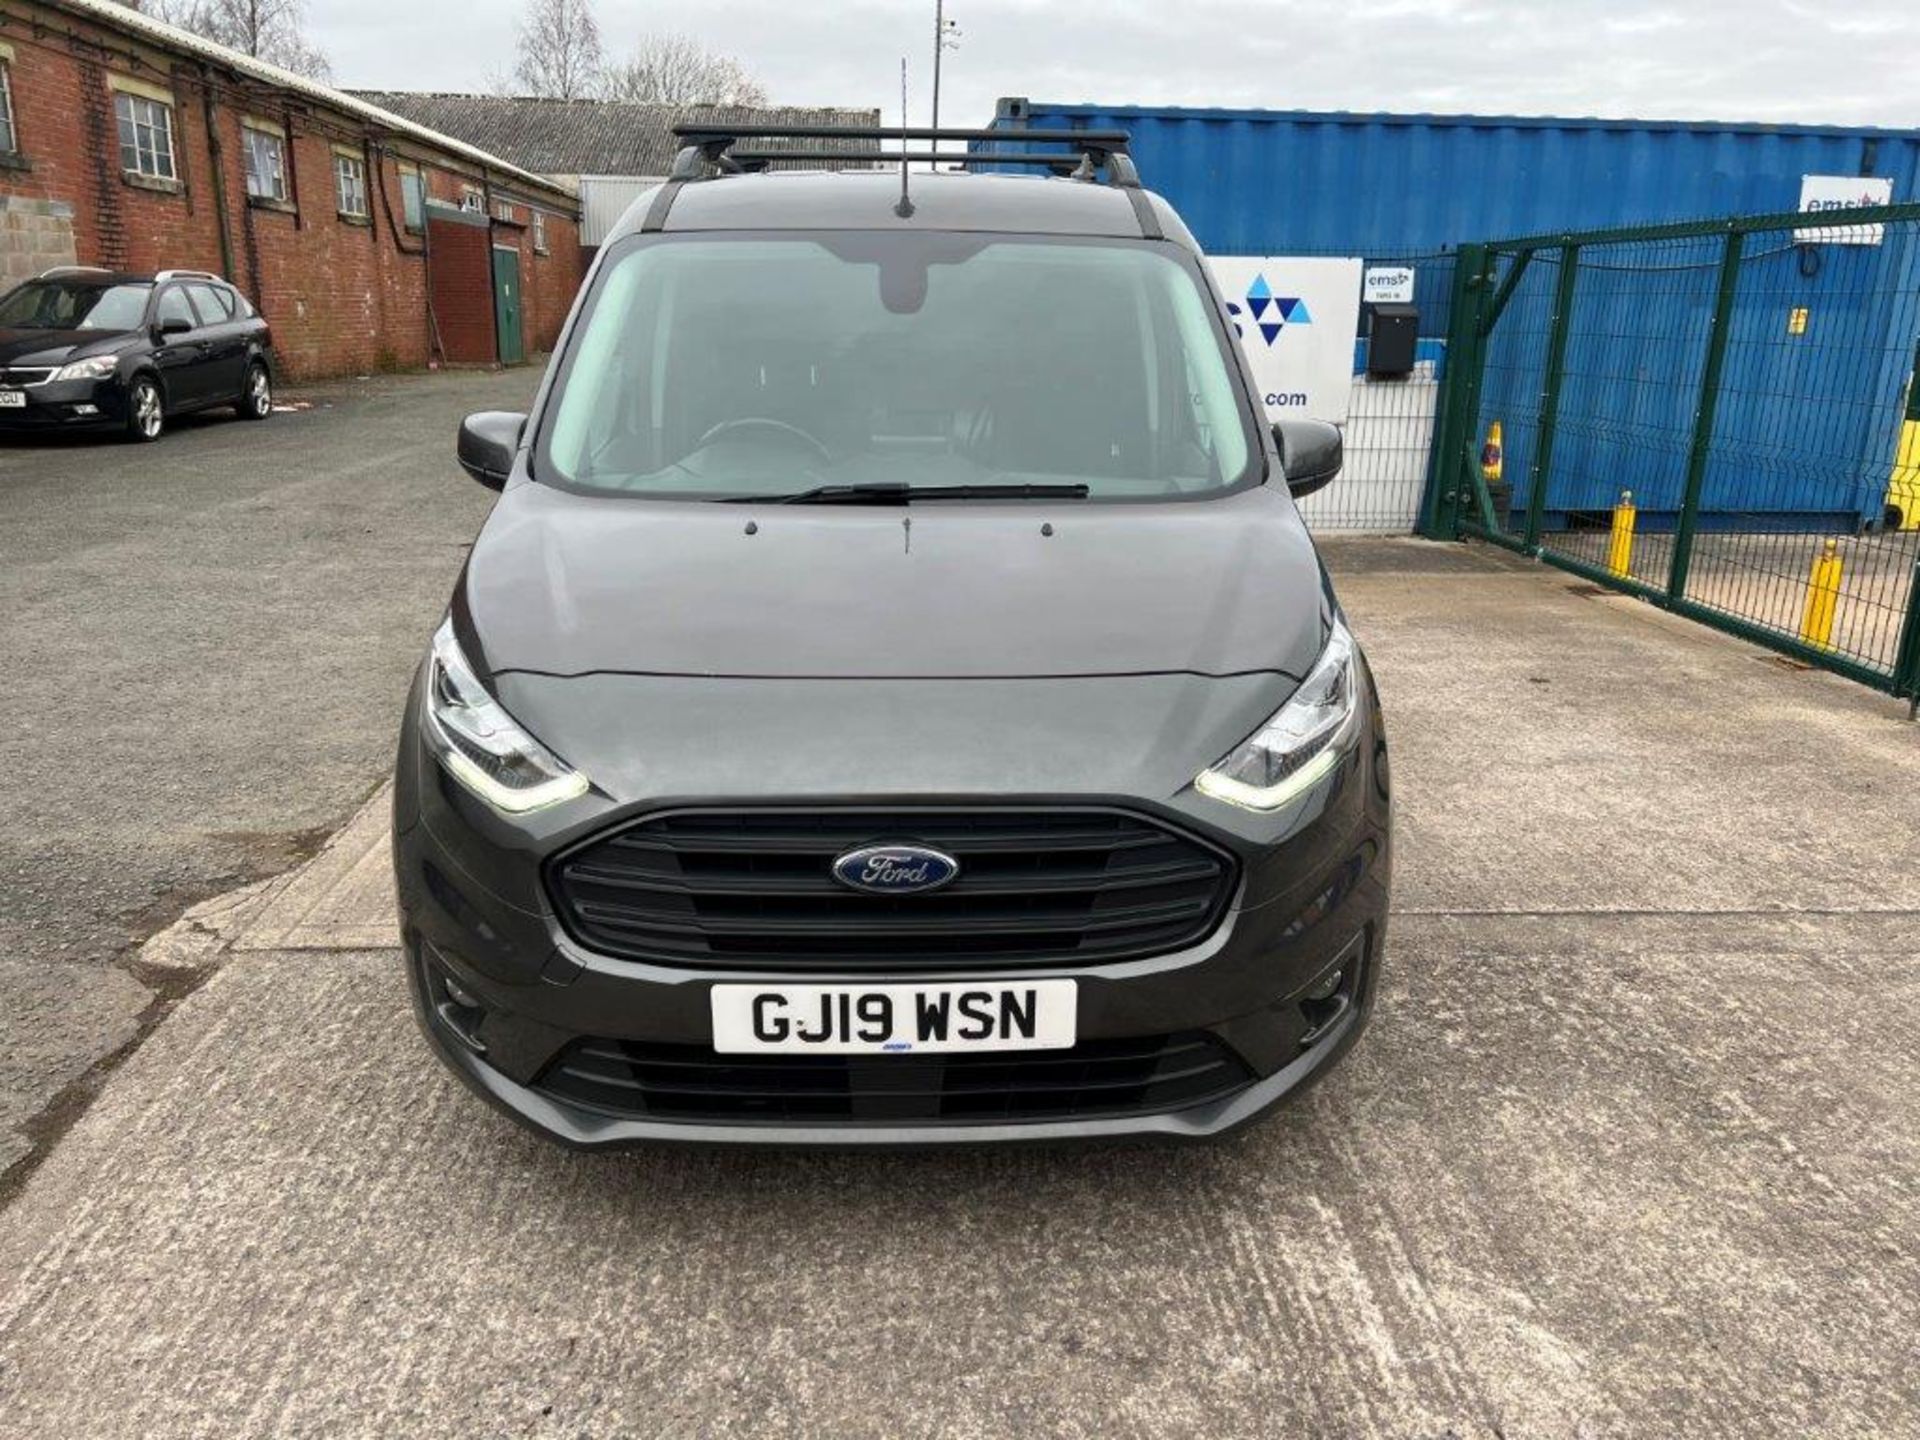 Ford Transit Connect 200 LTD TDCI Auto, Euro 6, 2019, facelift dash/screen - Image 2 of 16